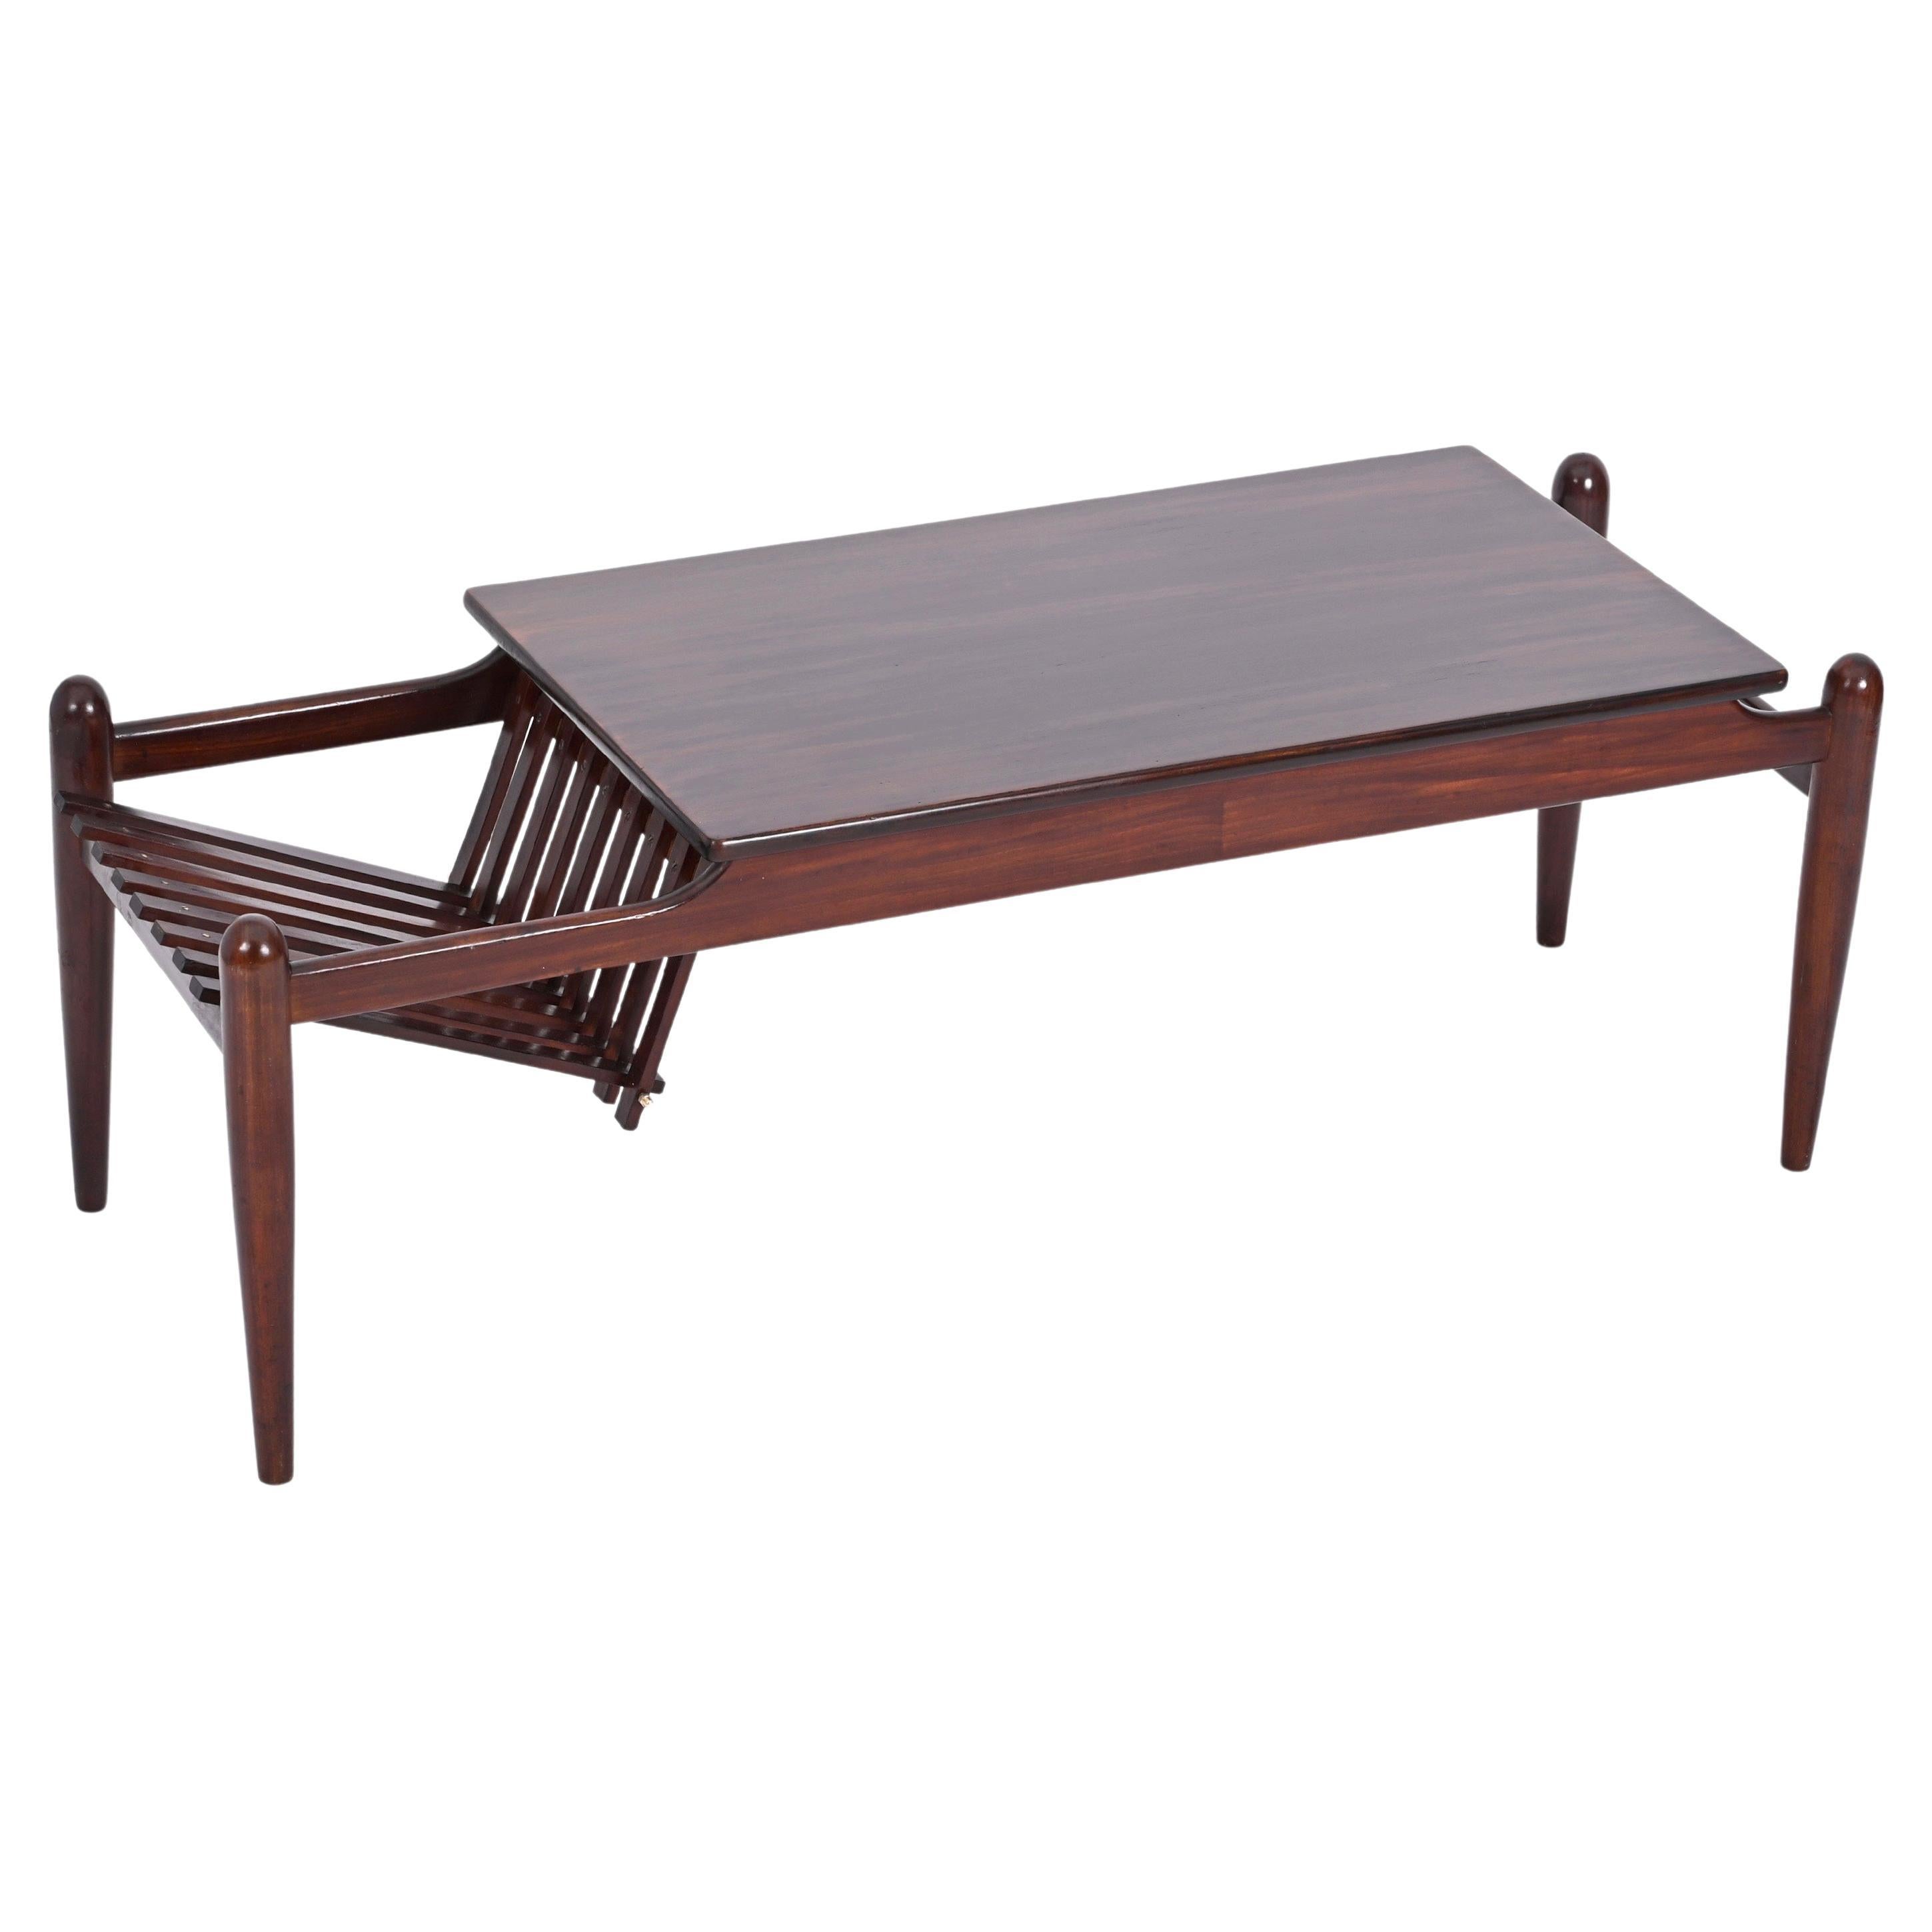 Midcentury Coffee Table with Magazine Rack in Teak Wood, Italy 1960s For Sale